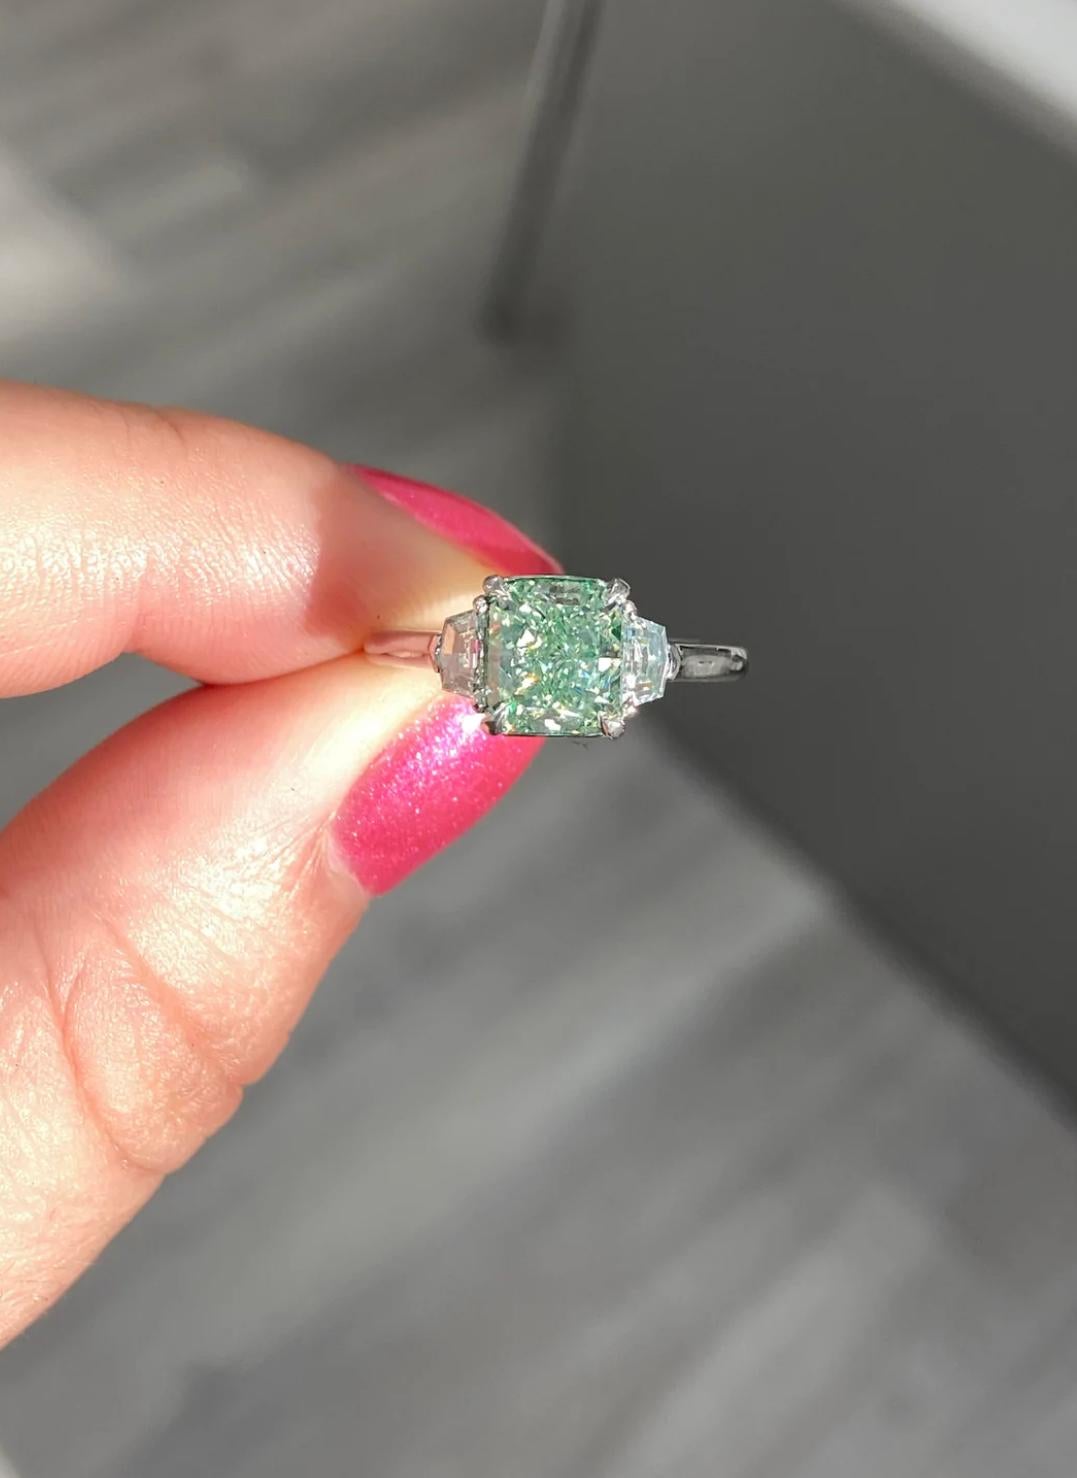 1.62ct Fancy Intense Yellowish Green with lime green color
Radiant cut with great spread
VS2 Clarity
Set in handmade platinum ring with 2 step cut trapezoid diamonds